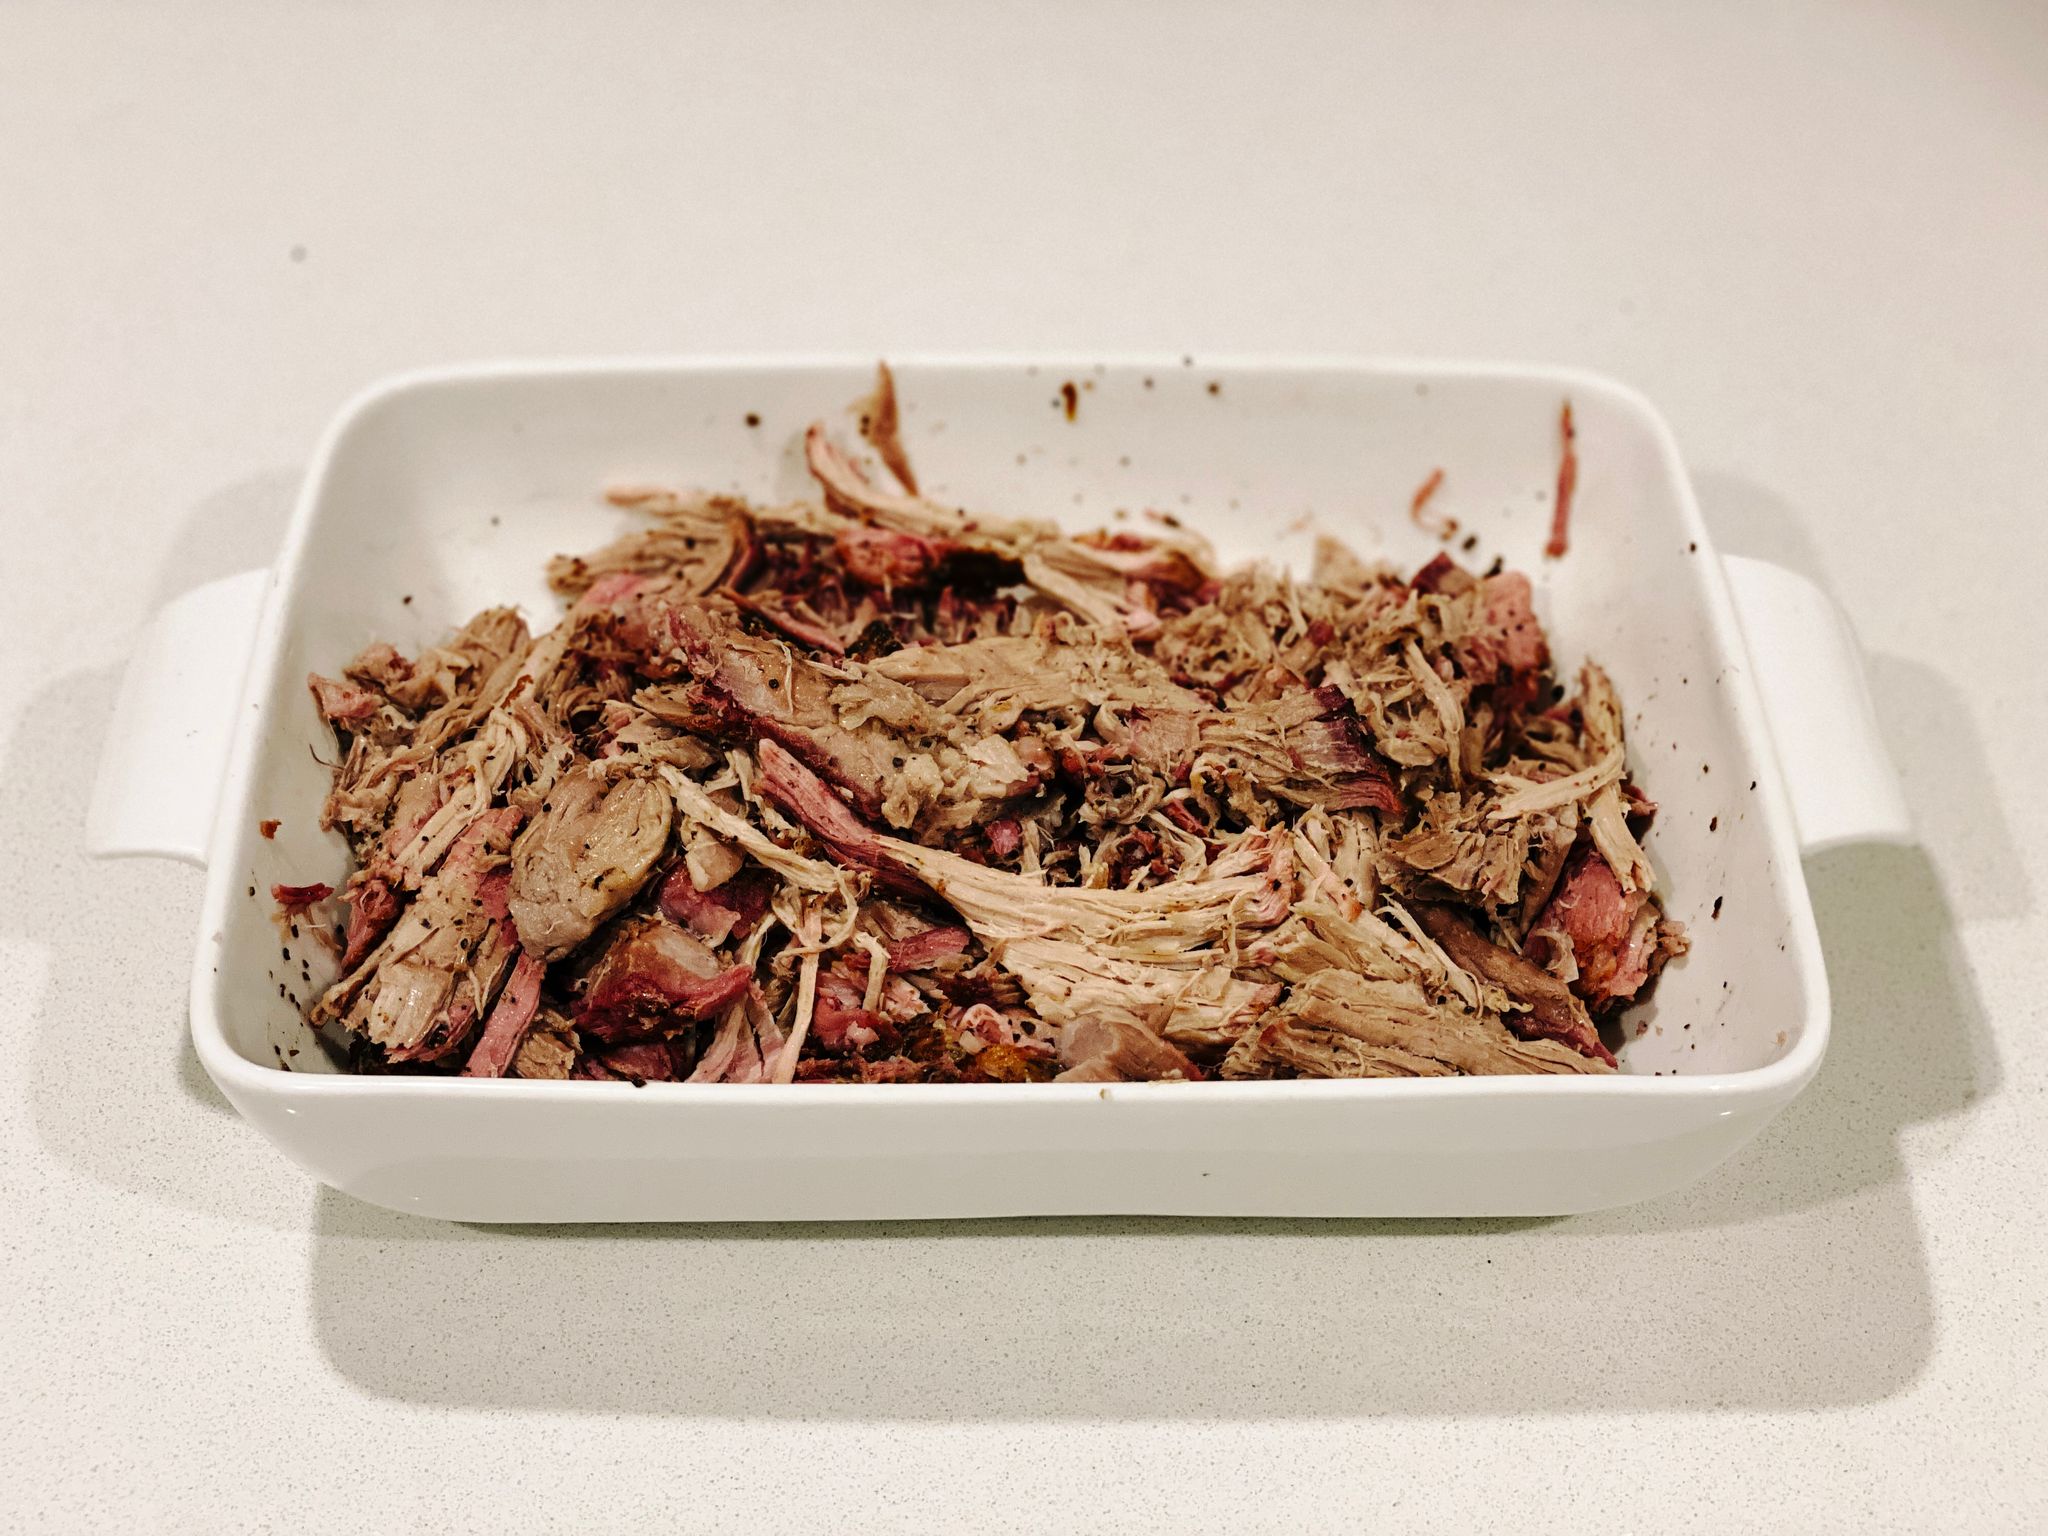 A photo of the pork all shredded up, showing excellent pink smoke ring.